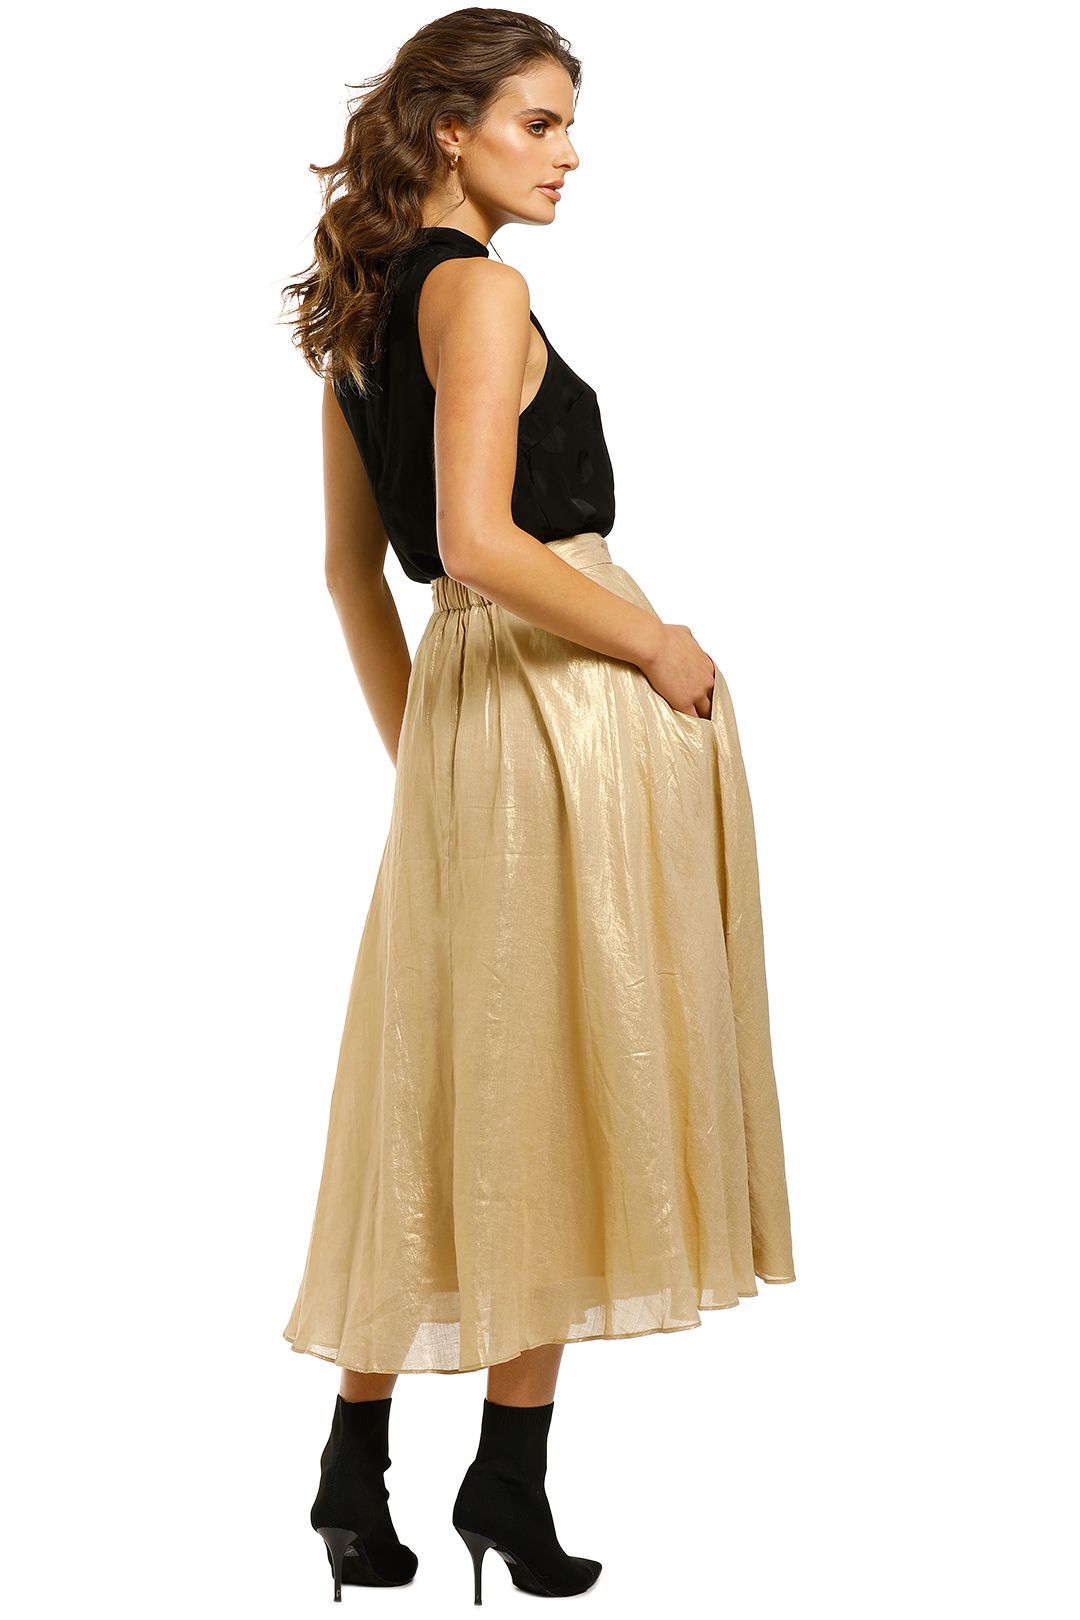 Glorious Skirt in Light Gold by Ginger and Smart for Hire | GlamCorner